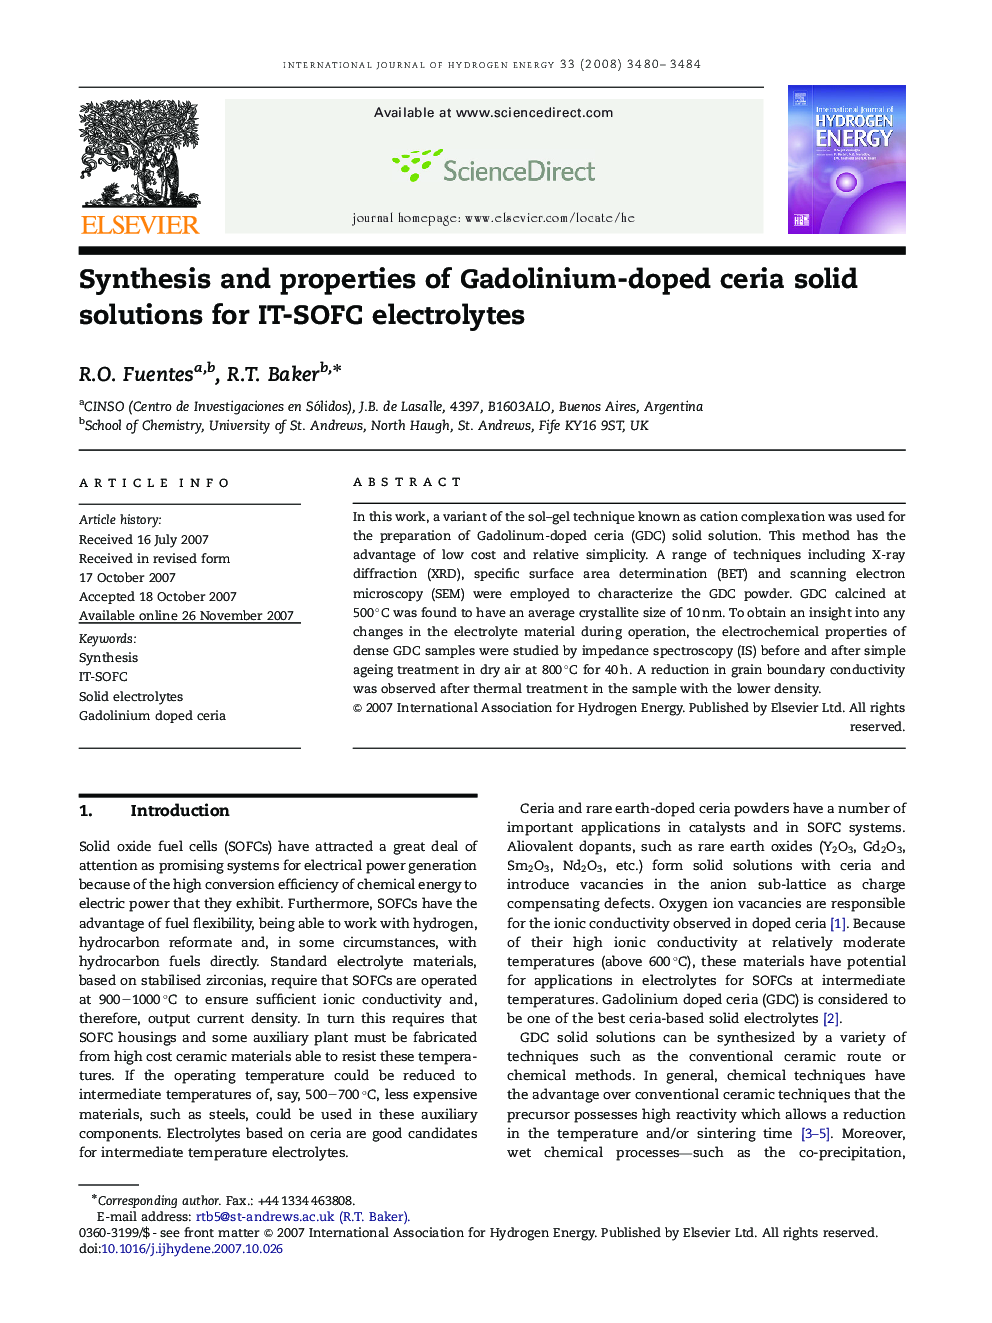 Synthesis and properties of Gadolinium-doped ceria solid solutions for IT-SOFC electrolytes